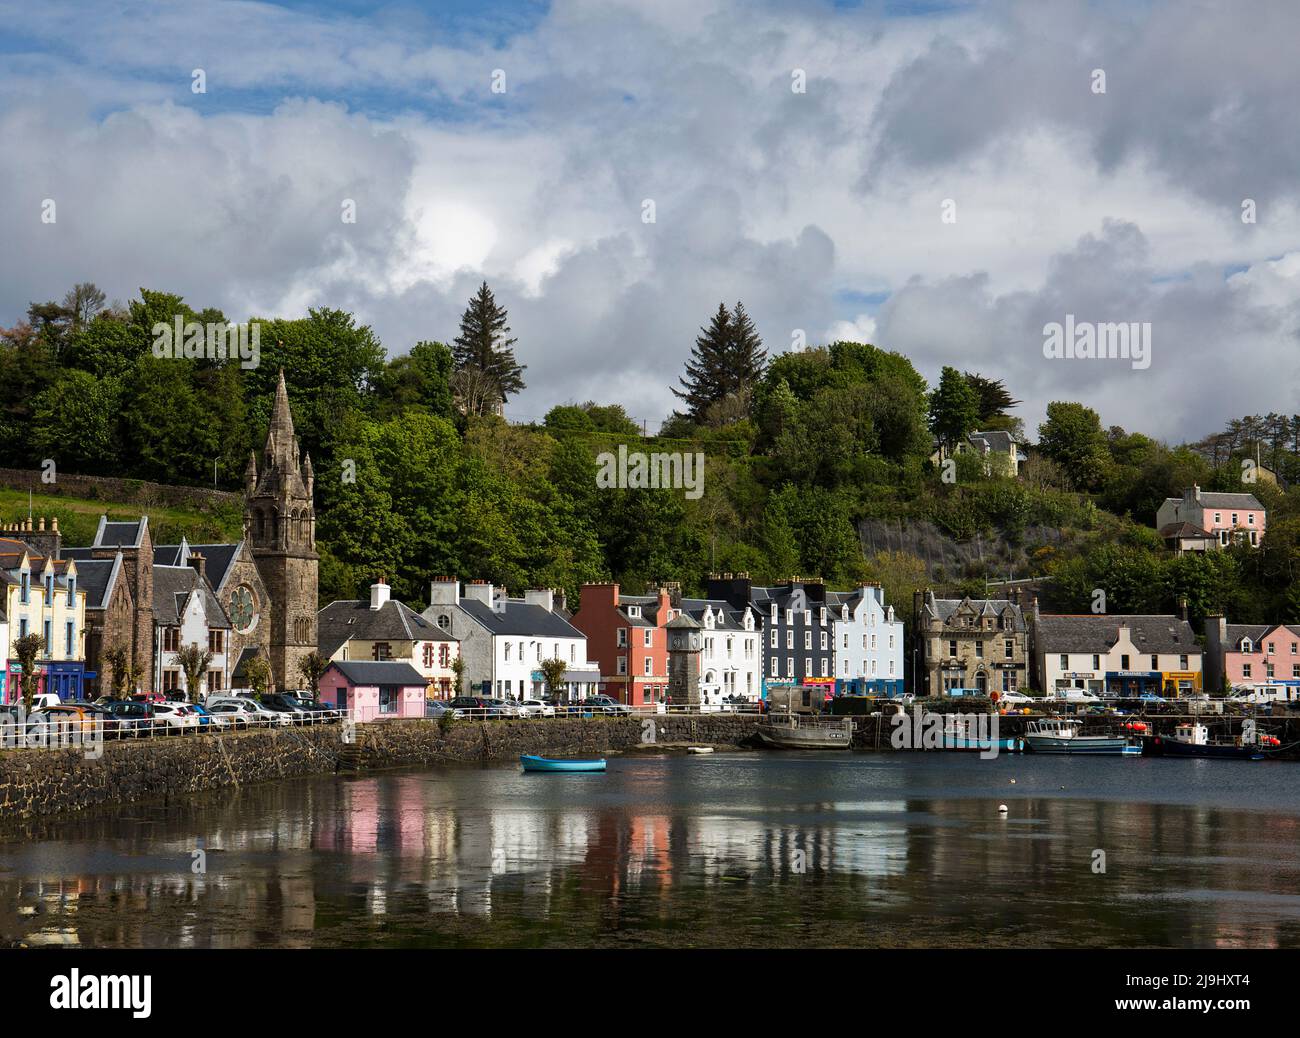 Tobermory, Isle of Mull, Scotland Banque D'Images